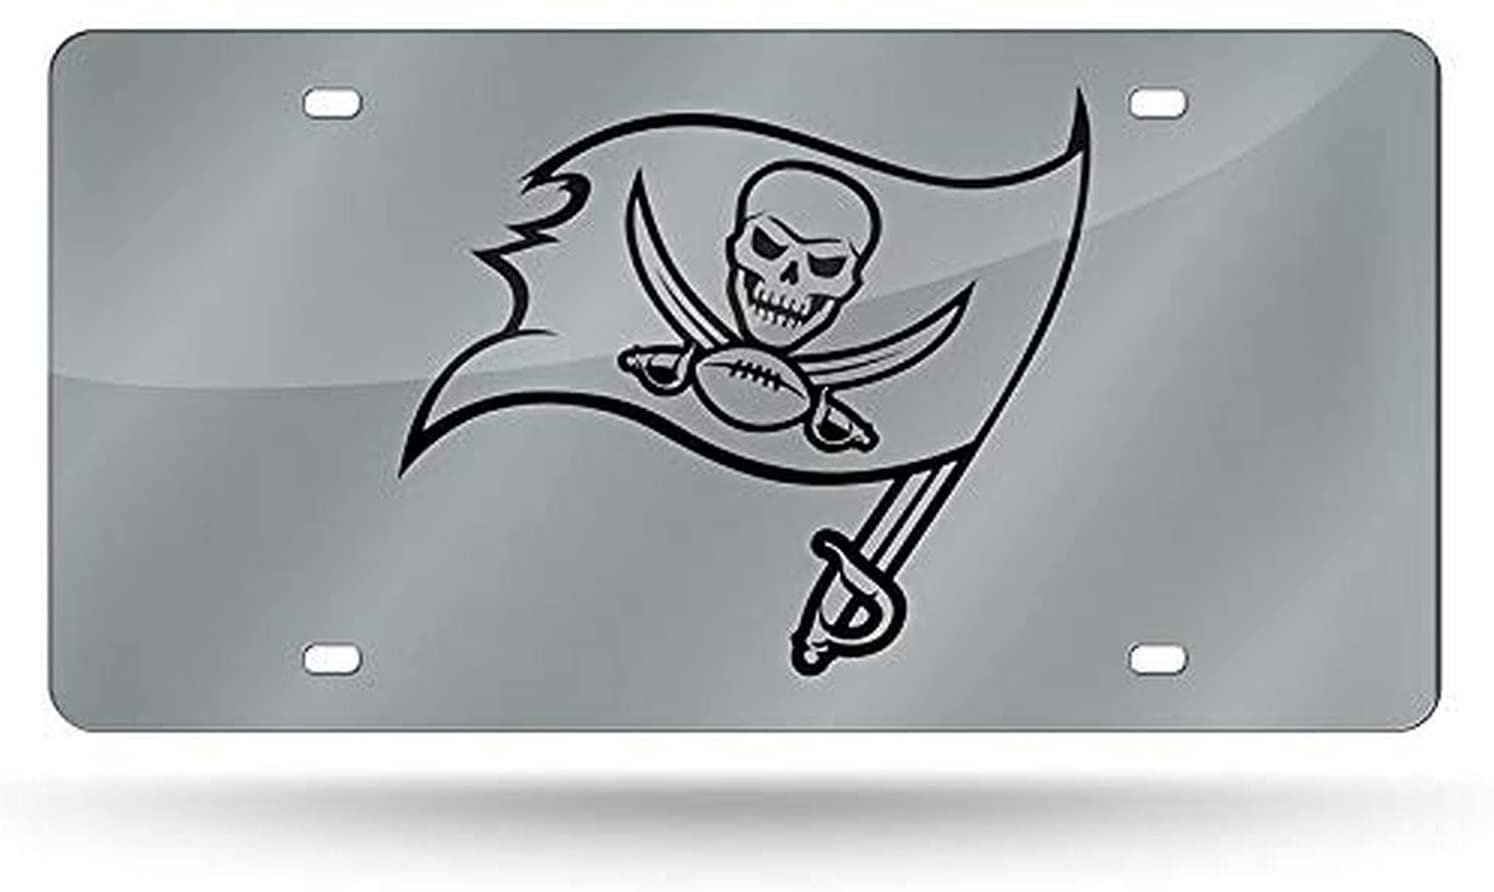 Tampa Bay Buccaneers Premium Laser Cut Tag License Plate, Mirrored Acrylic Inlaid, 12x6 Inch